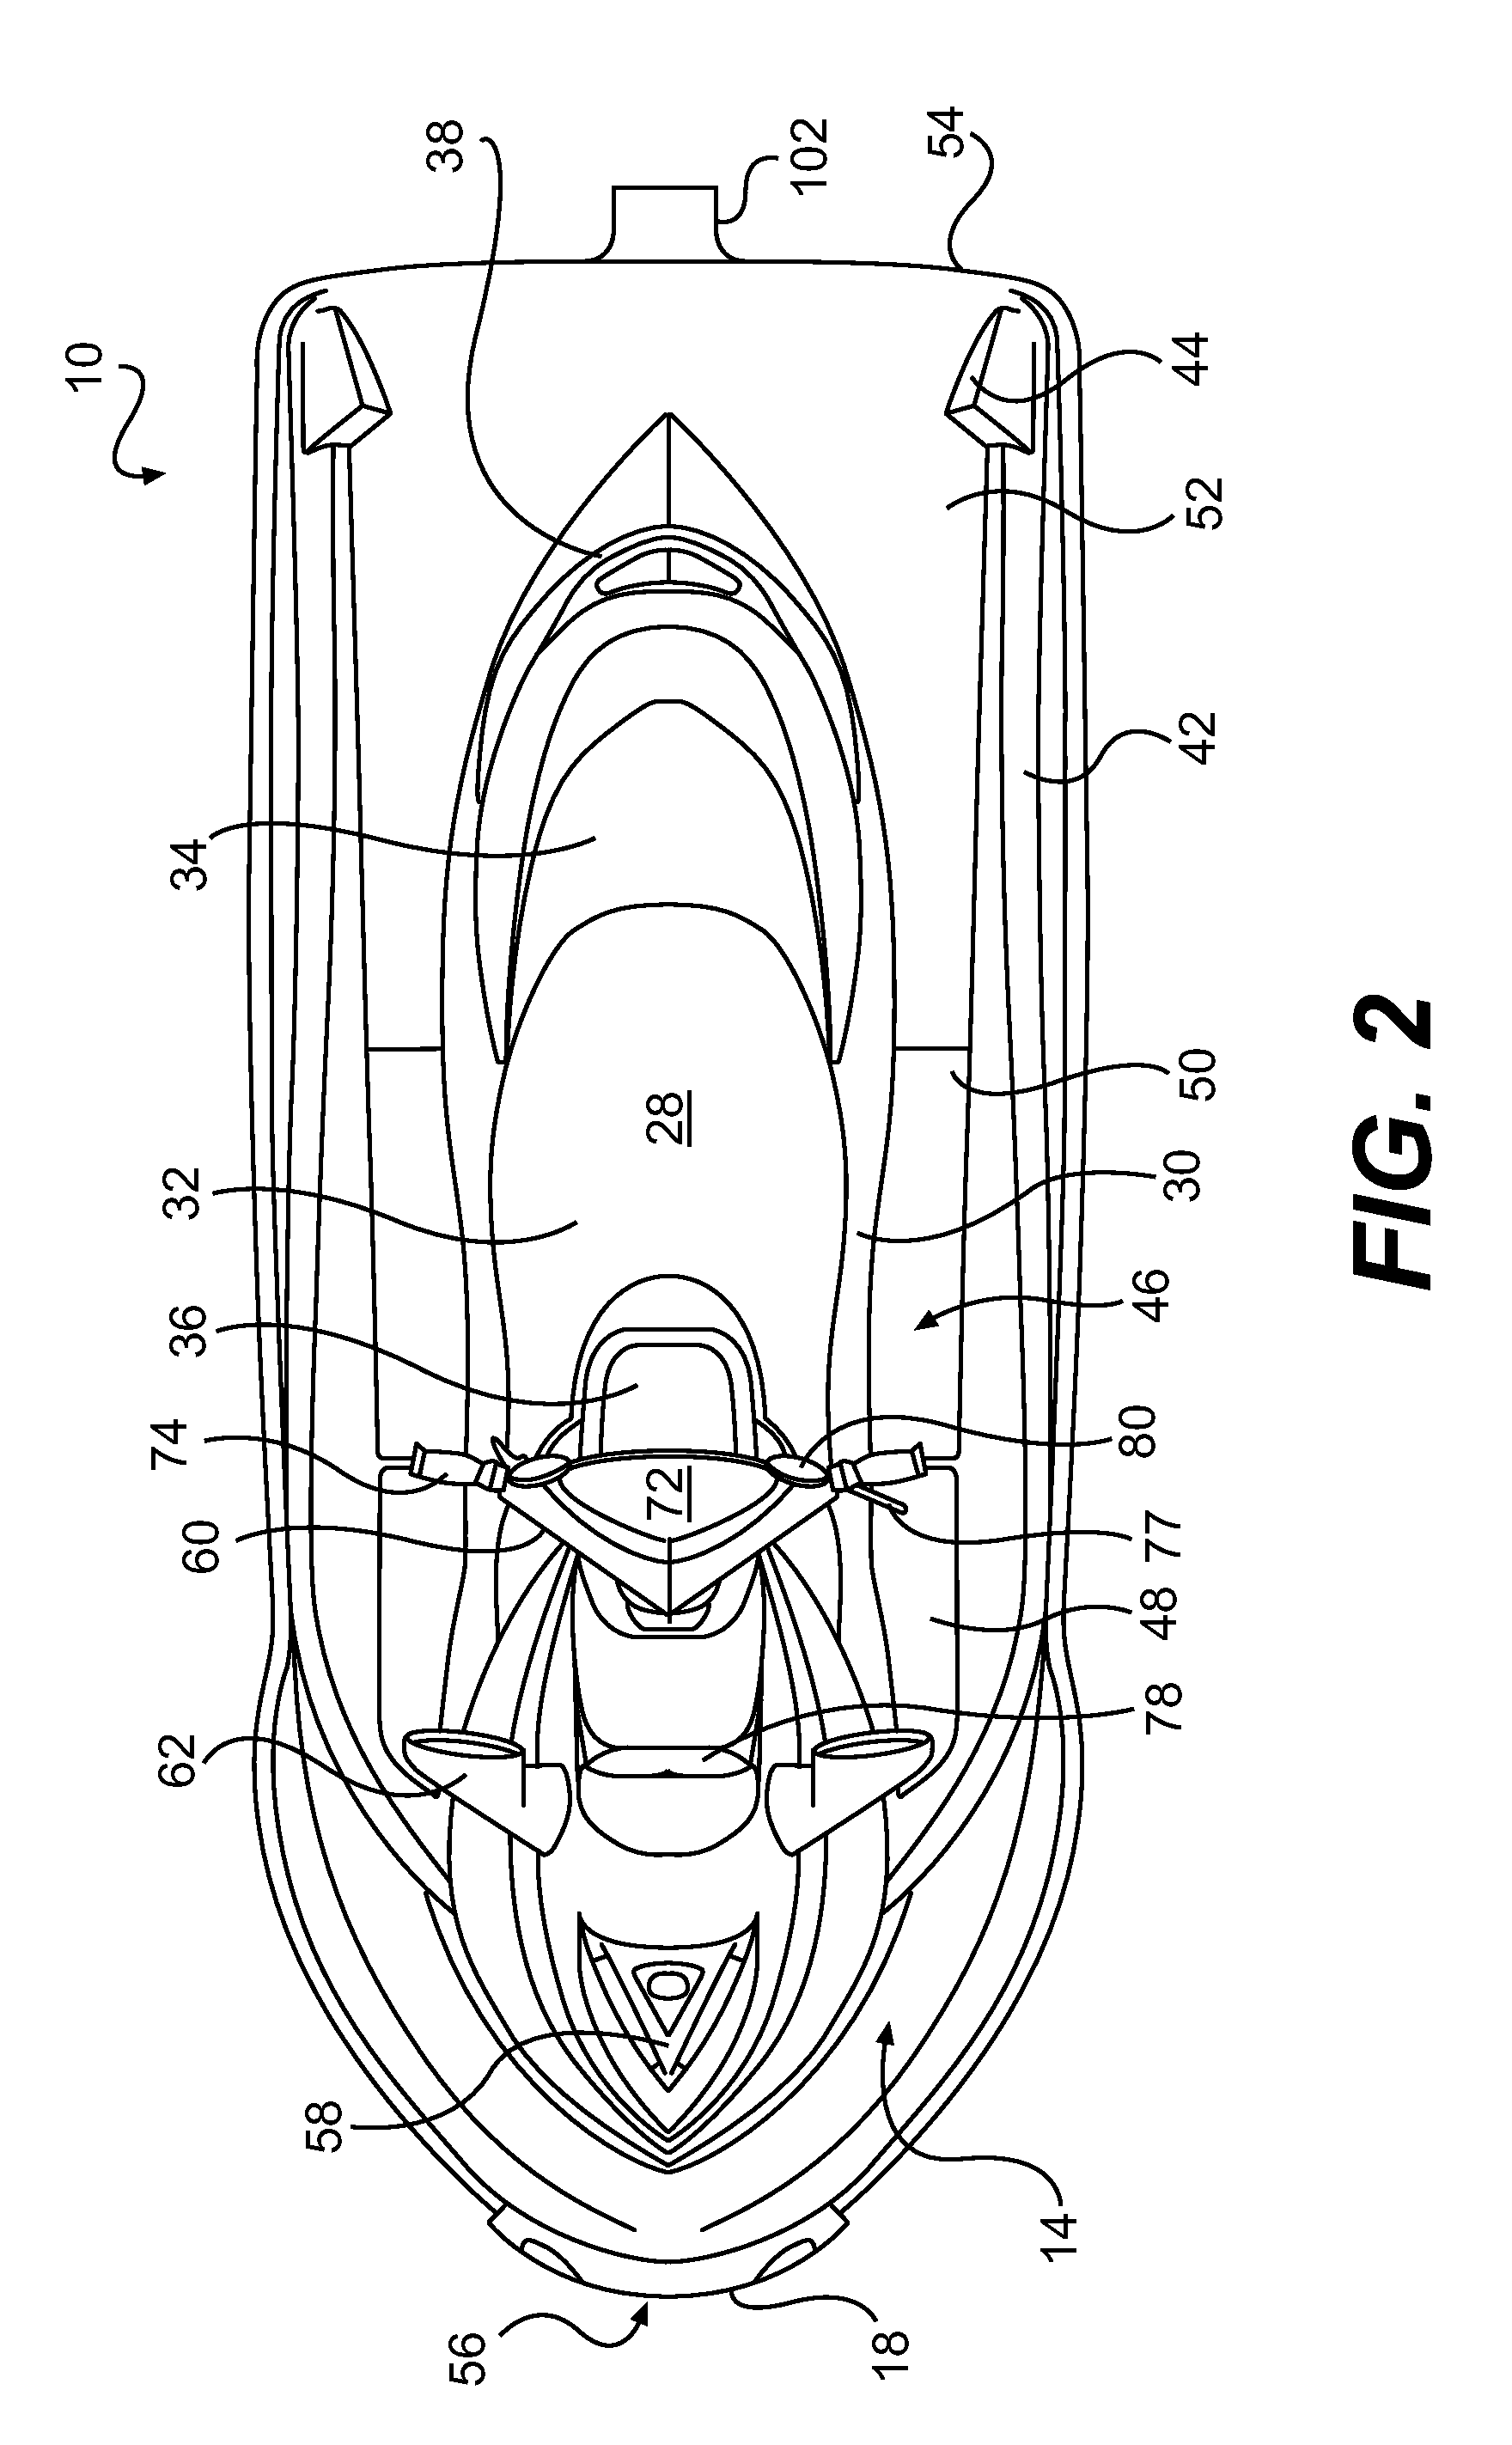 Watercraft with steer-responsive reverse gate